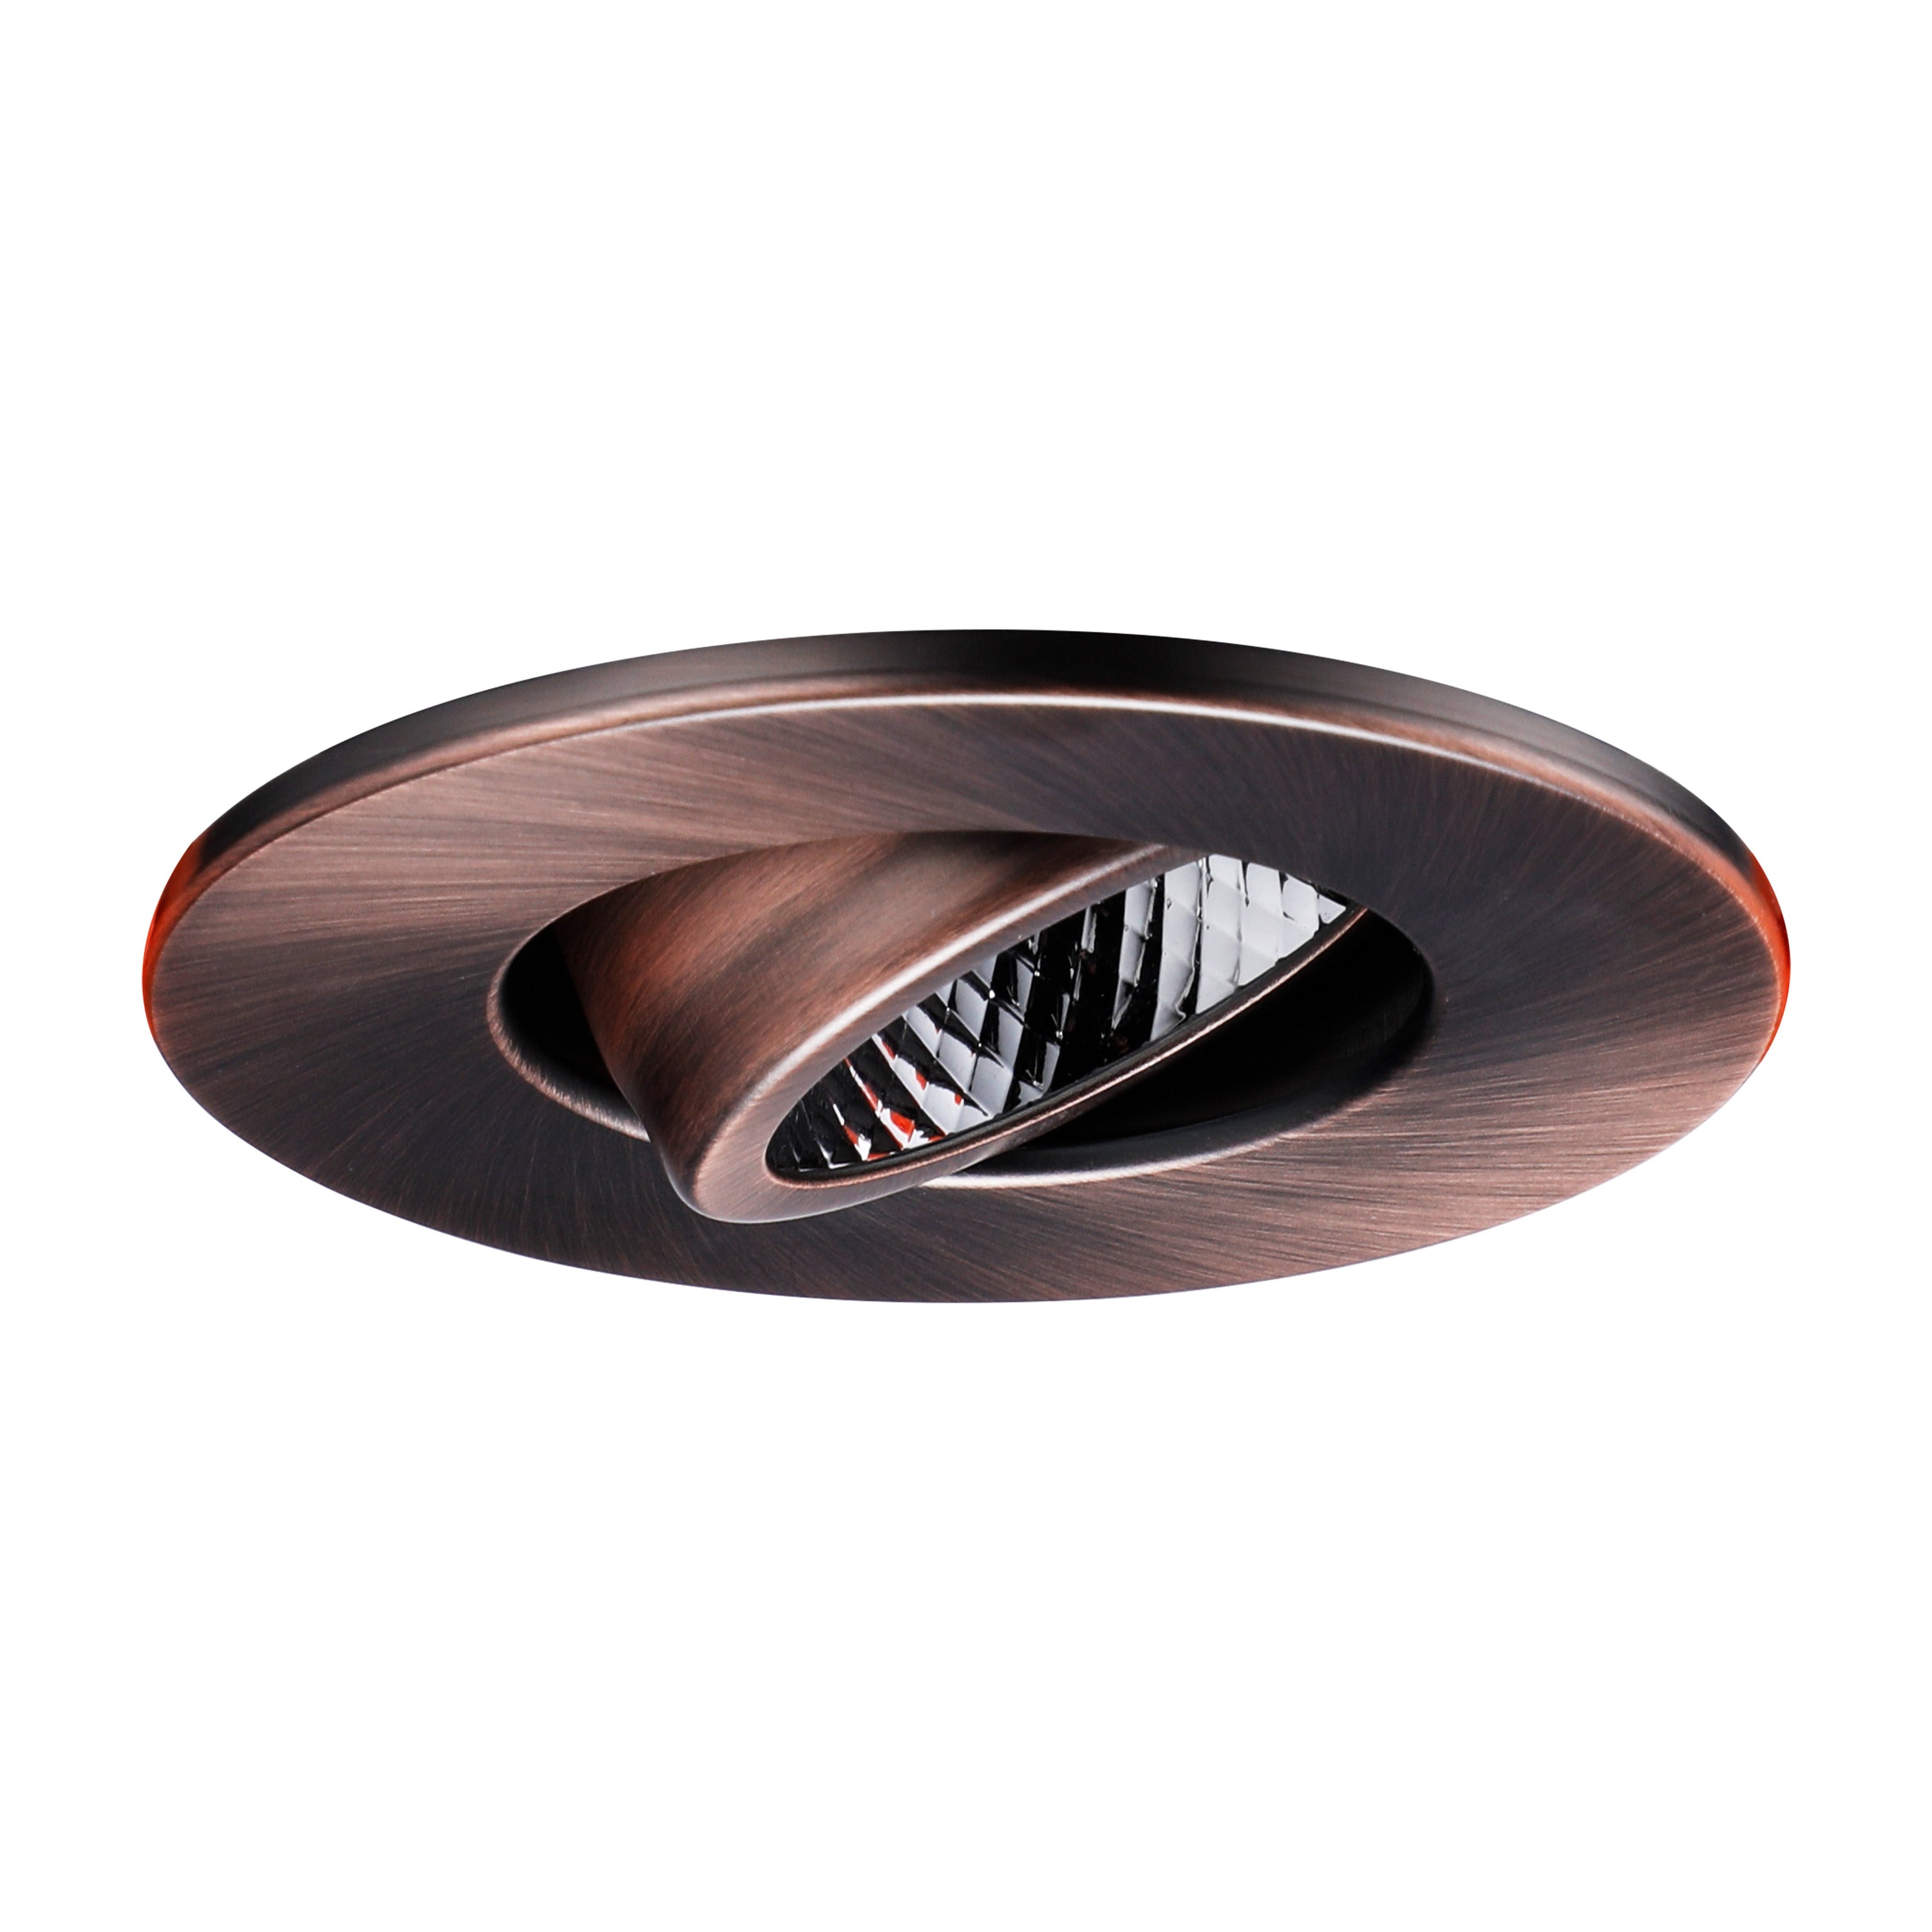 Circulex+ 3" Gimbal LED Recessed Light - Oil Rubbed Bronze - 7W - Adjustable CCT